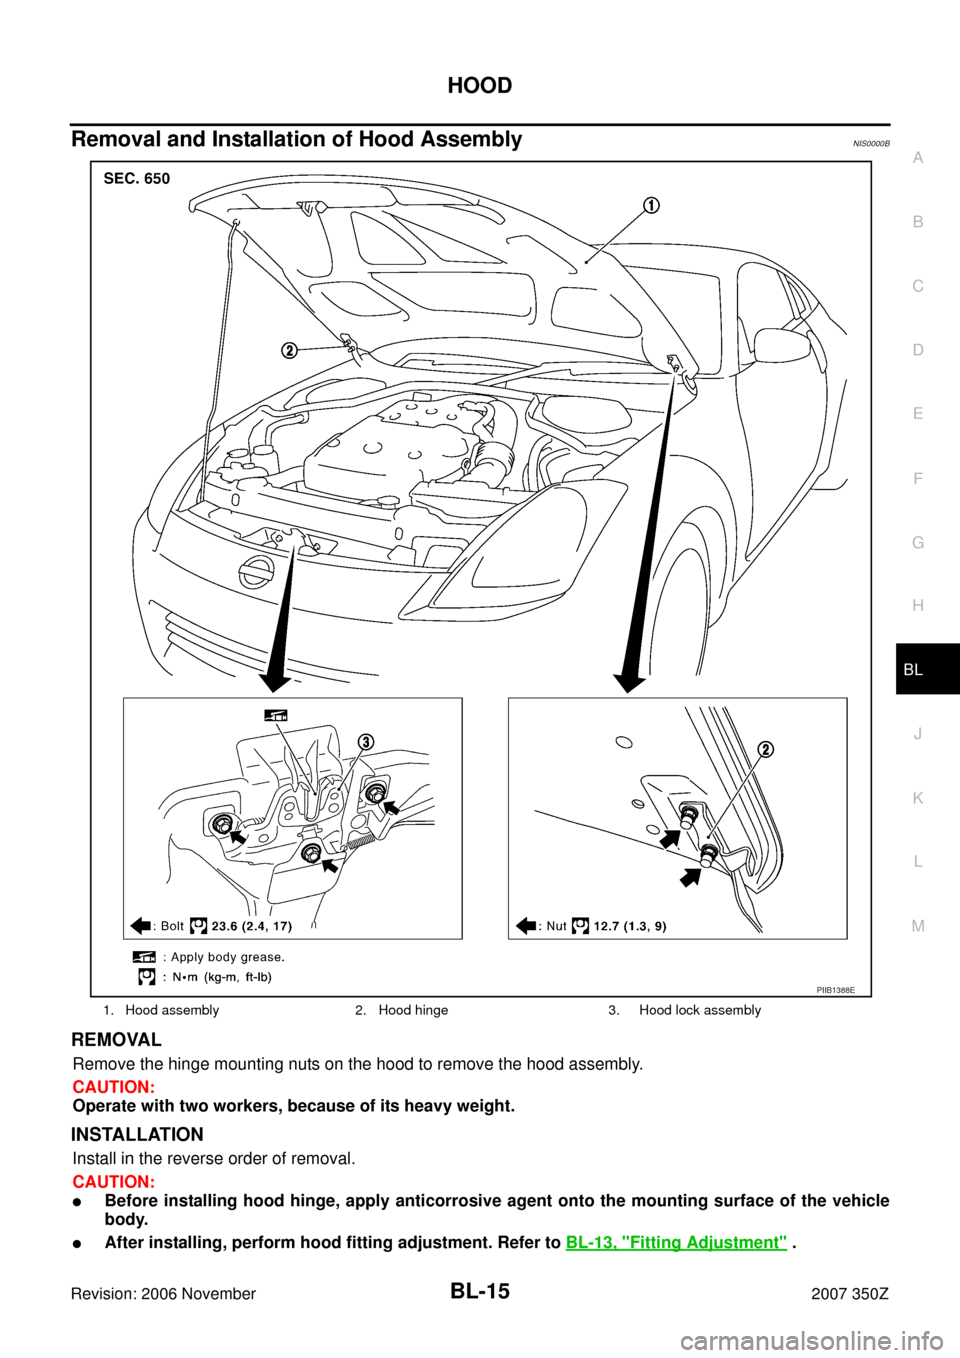 NISSAN 350Z 2007 Z33 Body, Lock And Security System Workshop Manual HOOD
BL-15
C
D
E
F
G
H
J
K
L
MA
B
BL
Revision: 2006 November2007 350Z
Removal and Installation of Hood AssemblyNIS0000B
REMOVAL
Remove the hinge mounting nuts on the hood to remove the hood assembly.
